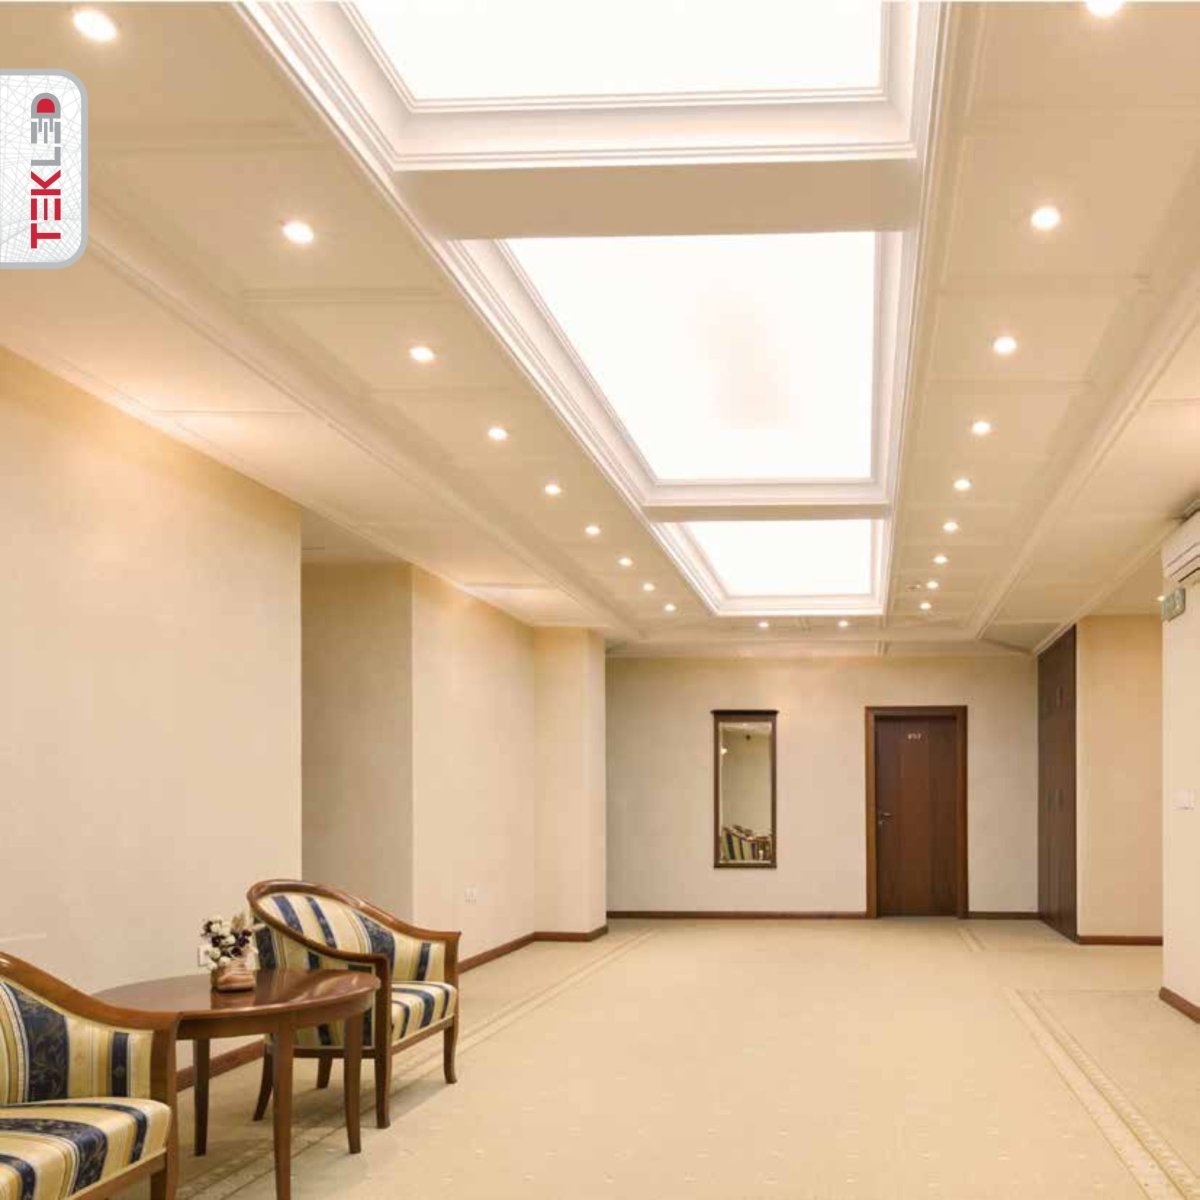 Downlight Led Round Slim Panel Light 6W 3000K Warm White D120Mm in indoor setting waiting room